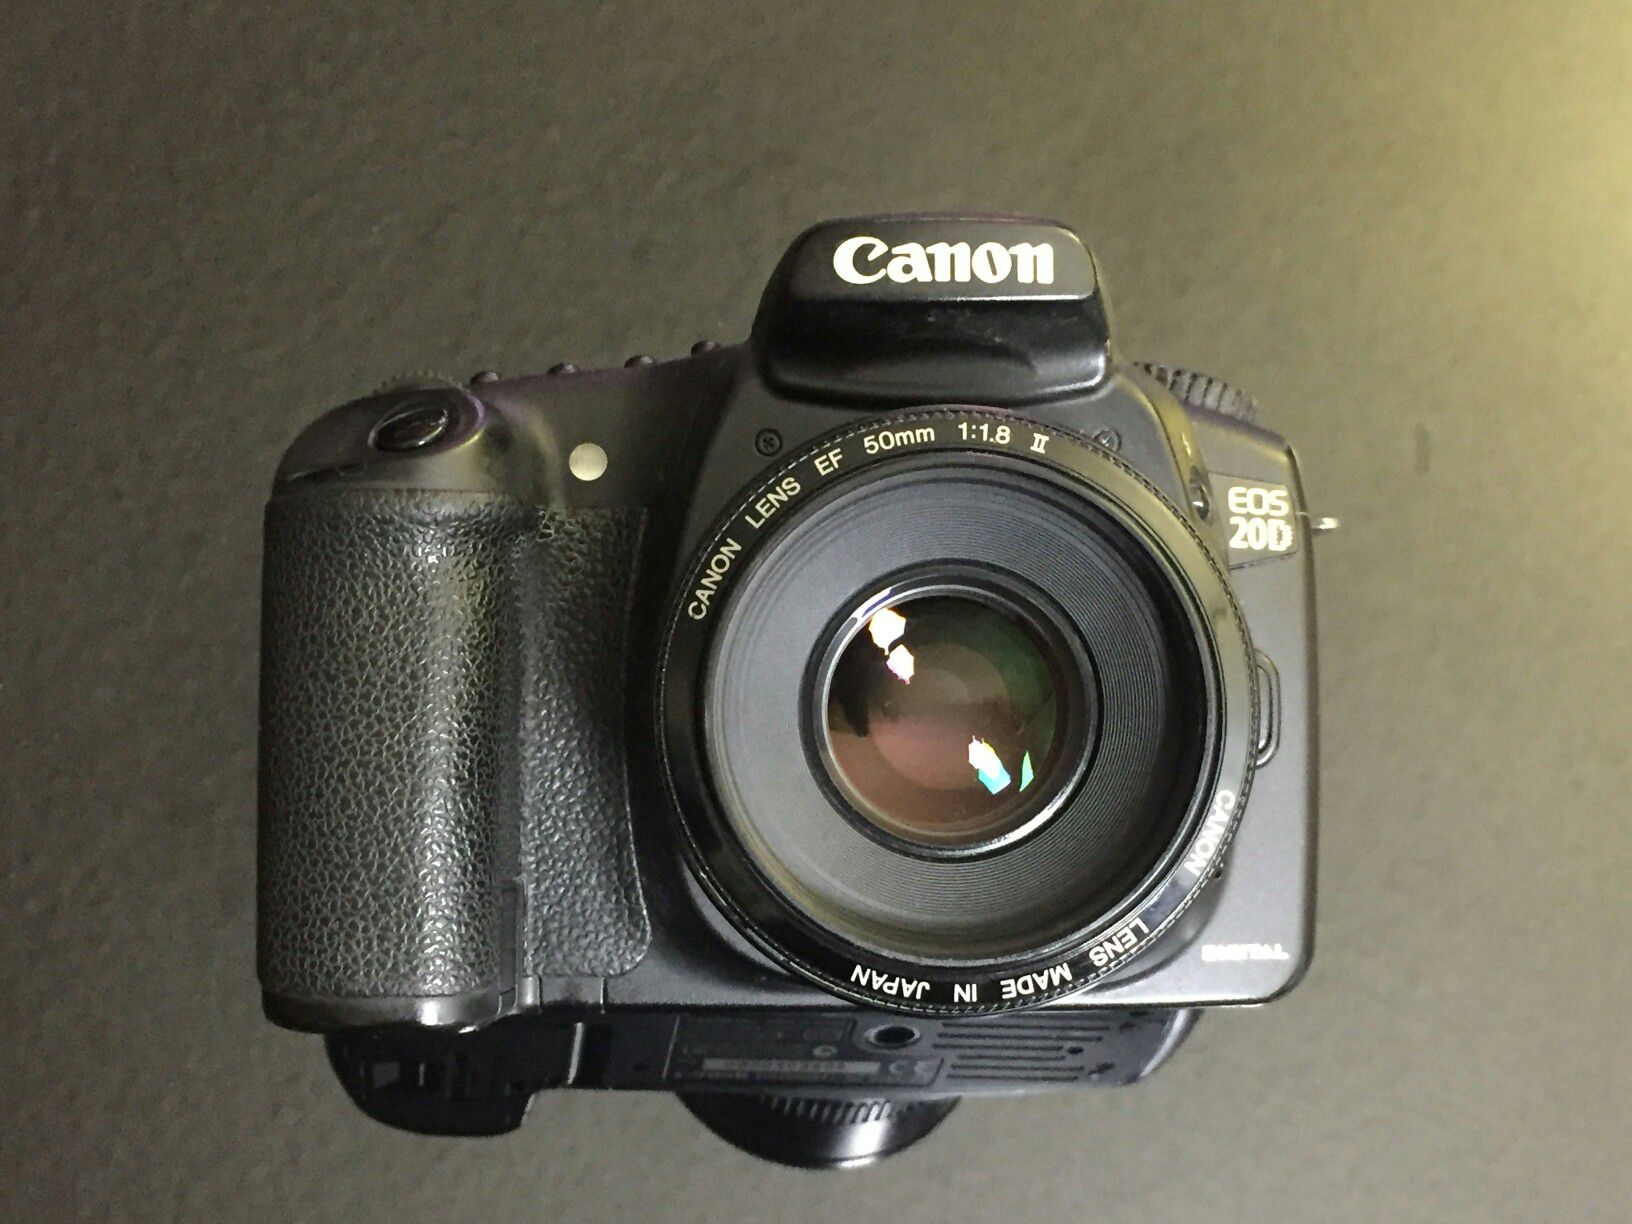 CANON EOS 20D WITH BOX (EXCELLENT!) $90